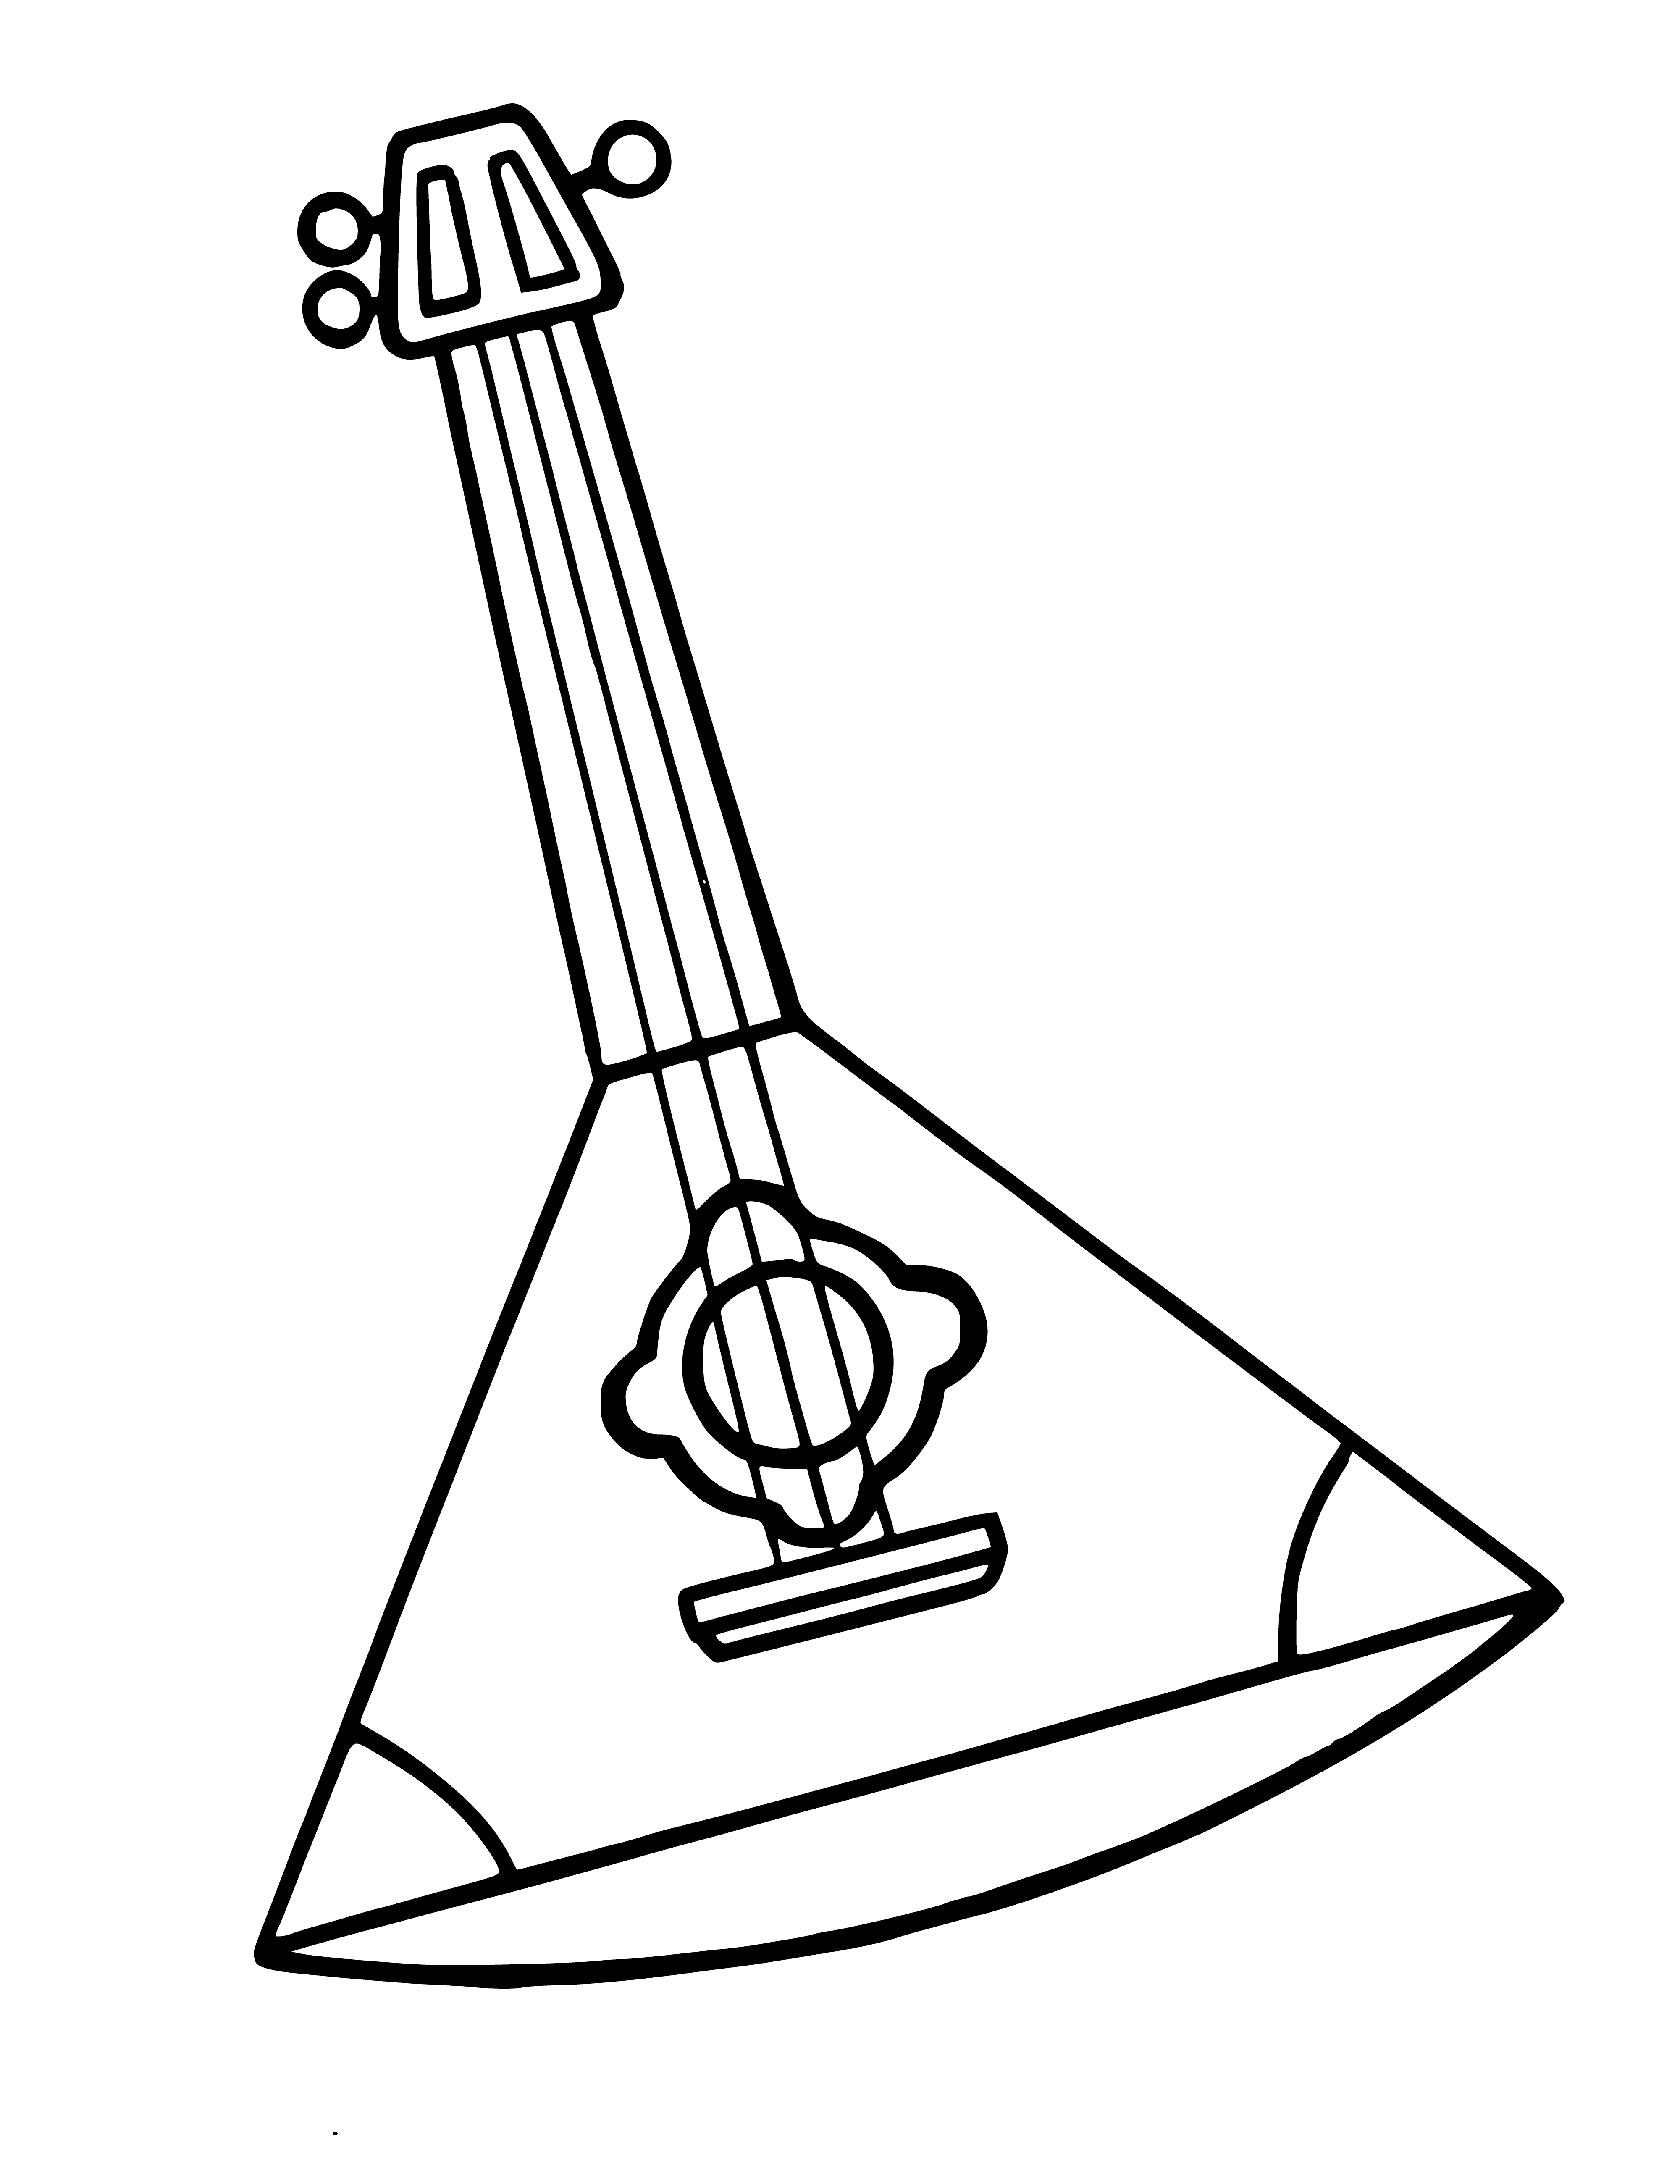 coloring page: Russian stringed instrument with 3 strings played with fingers or plectrum for a resonant sound.